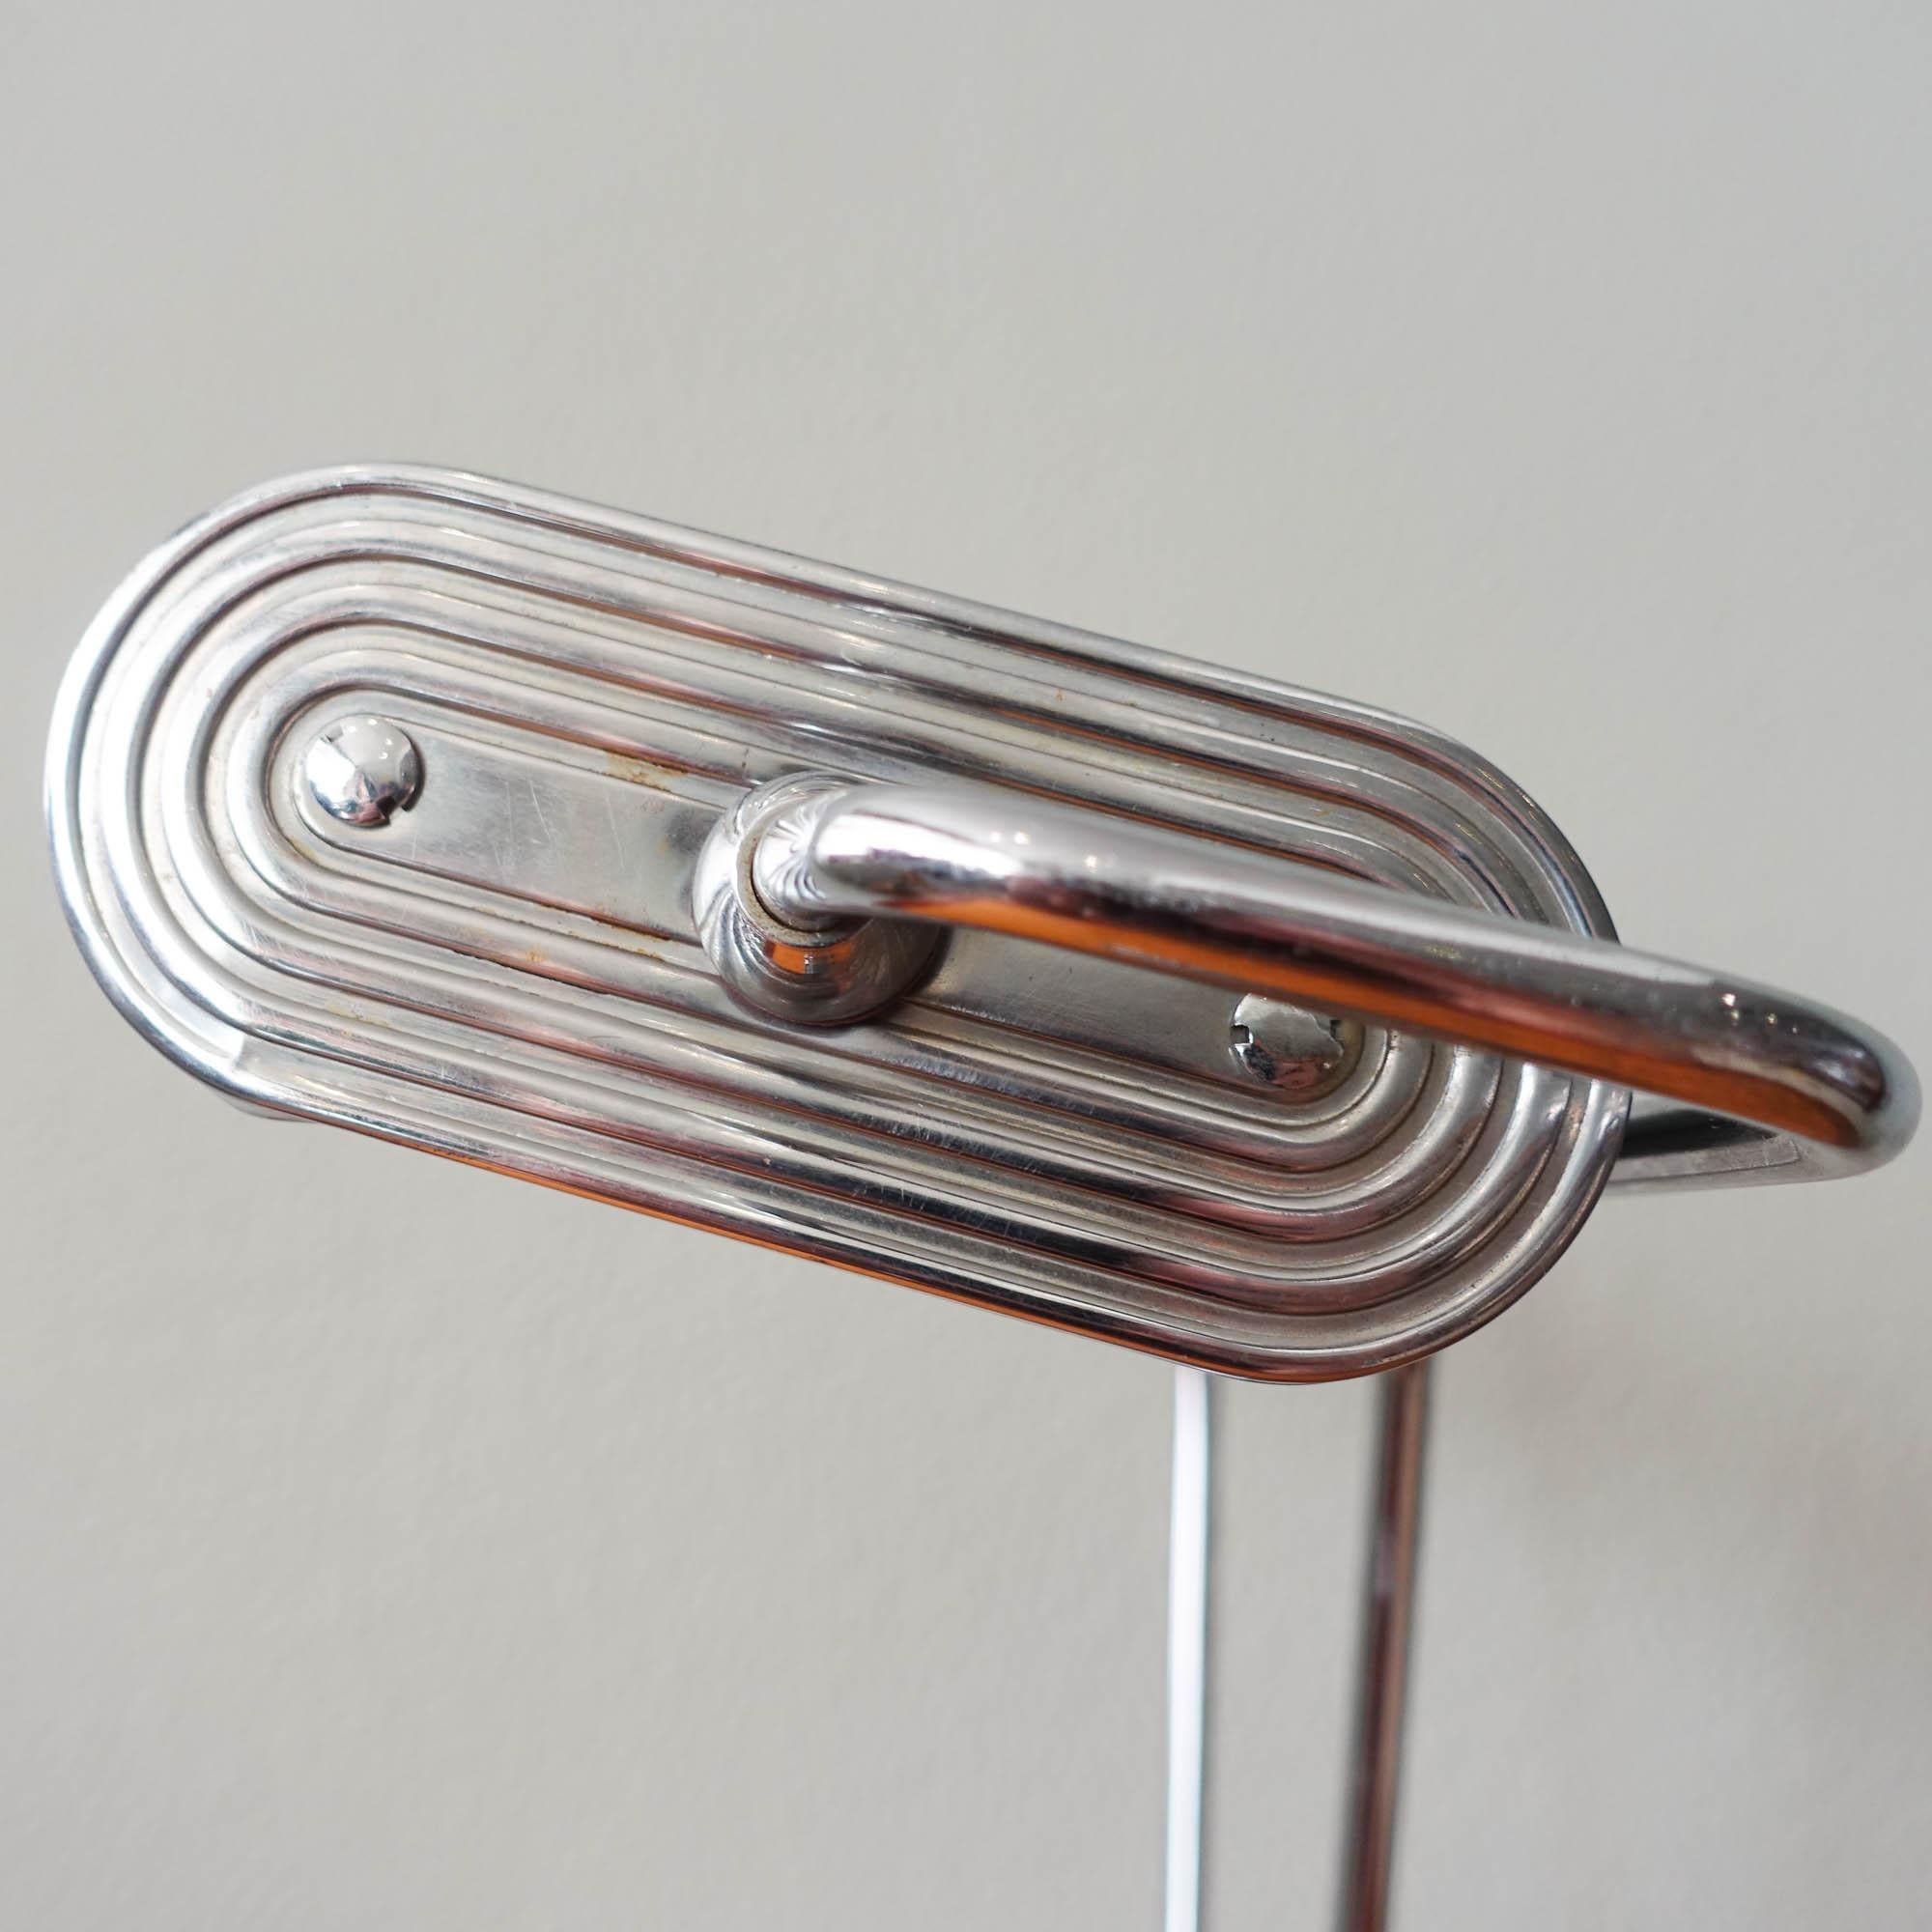 No.71 Desk Lamp by Eileen Gray for Jumo, 1930s For Sale 2